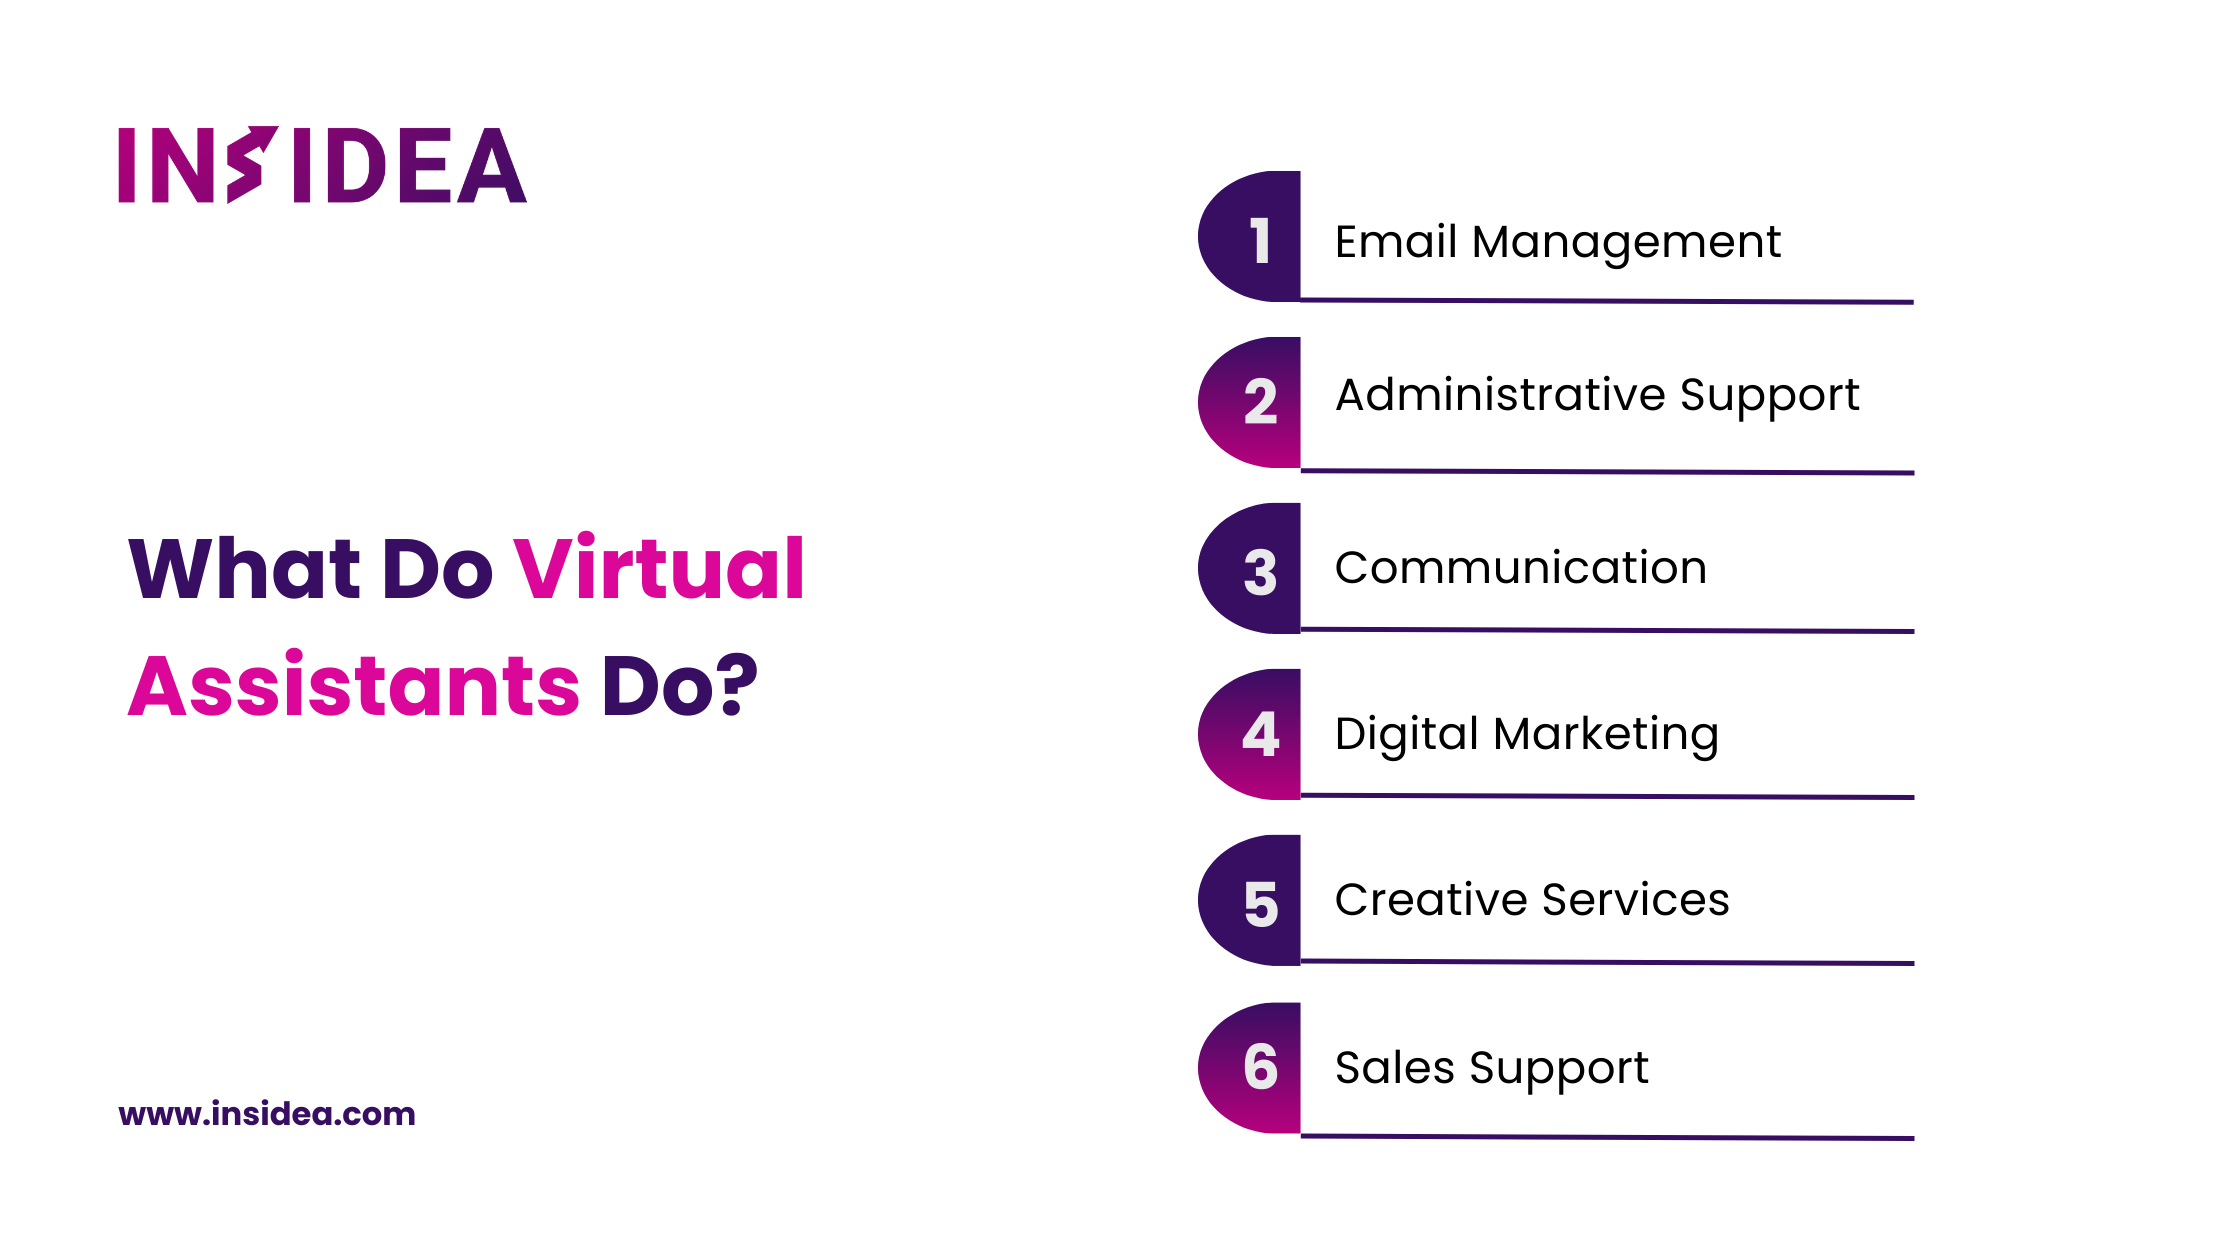 What Do Virtual Assistants Do